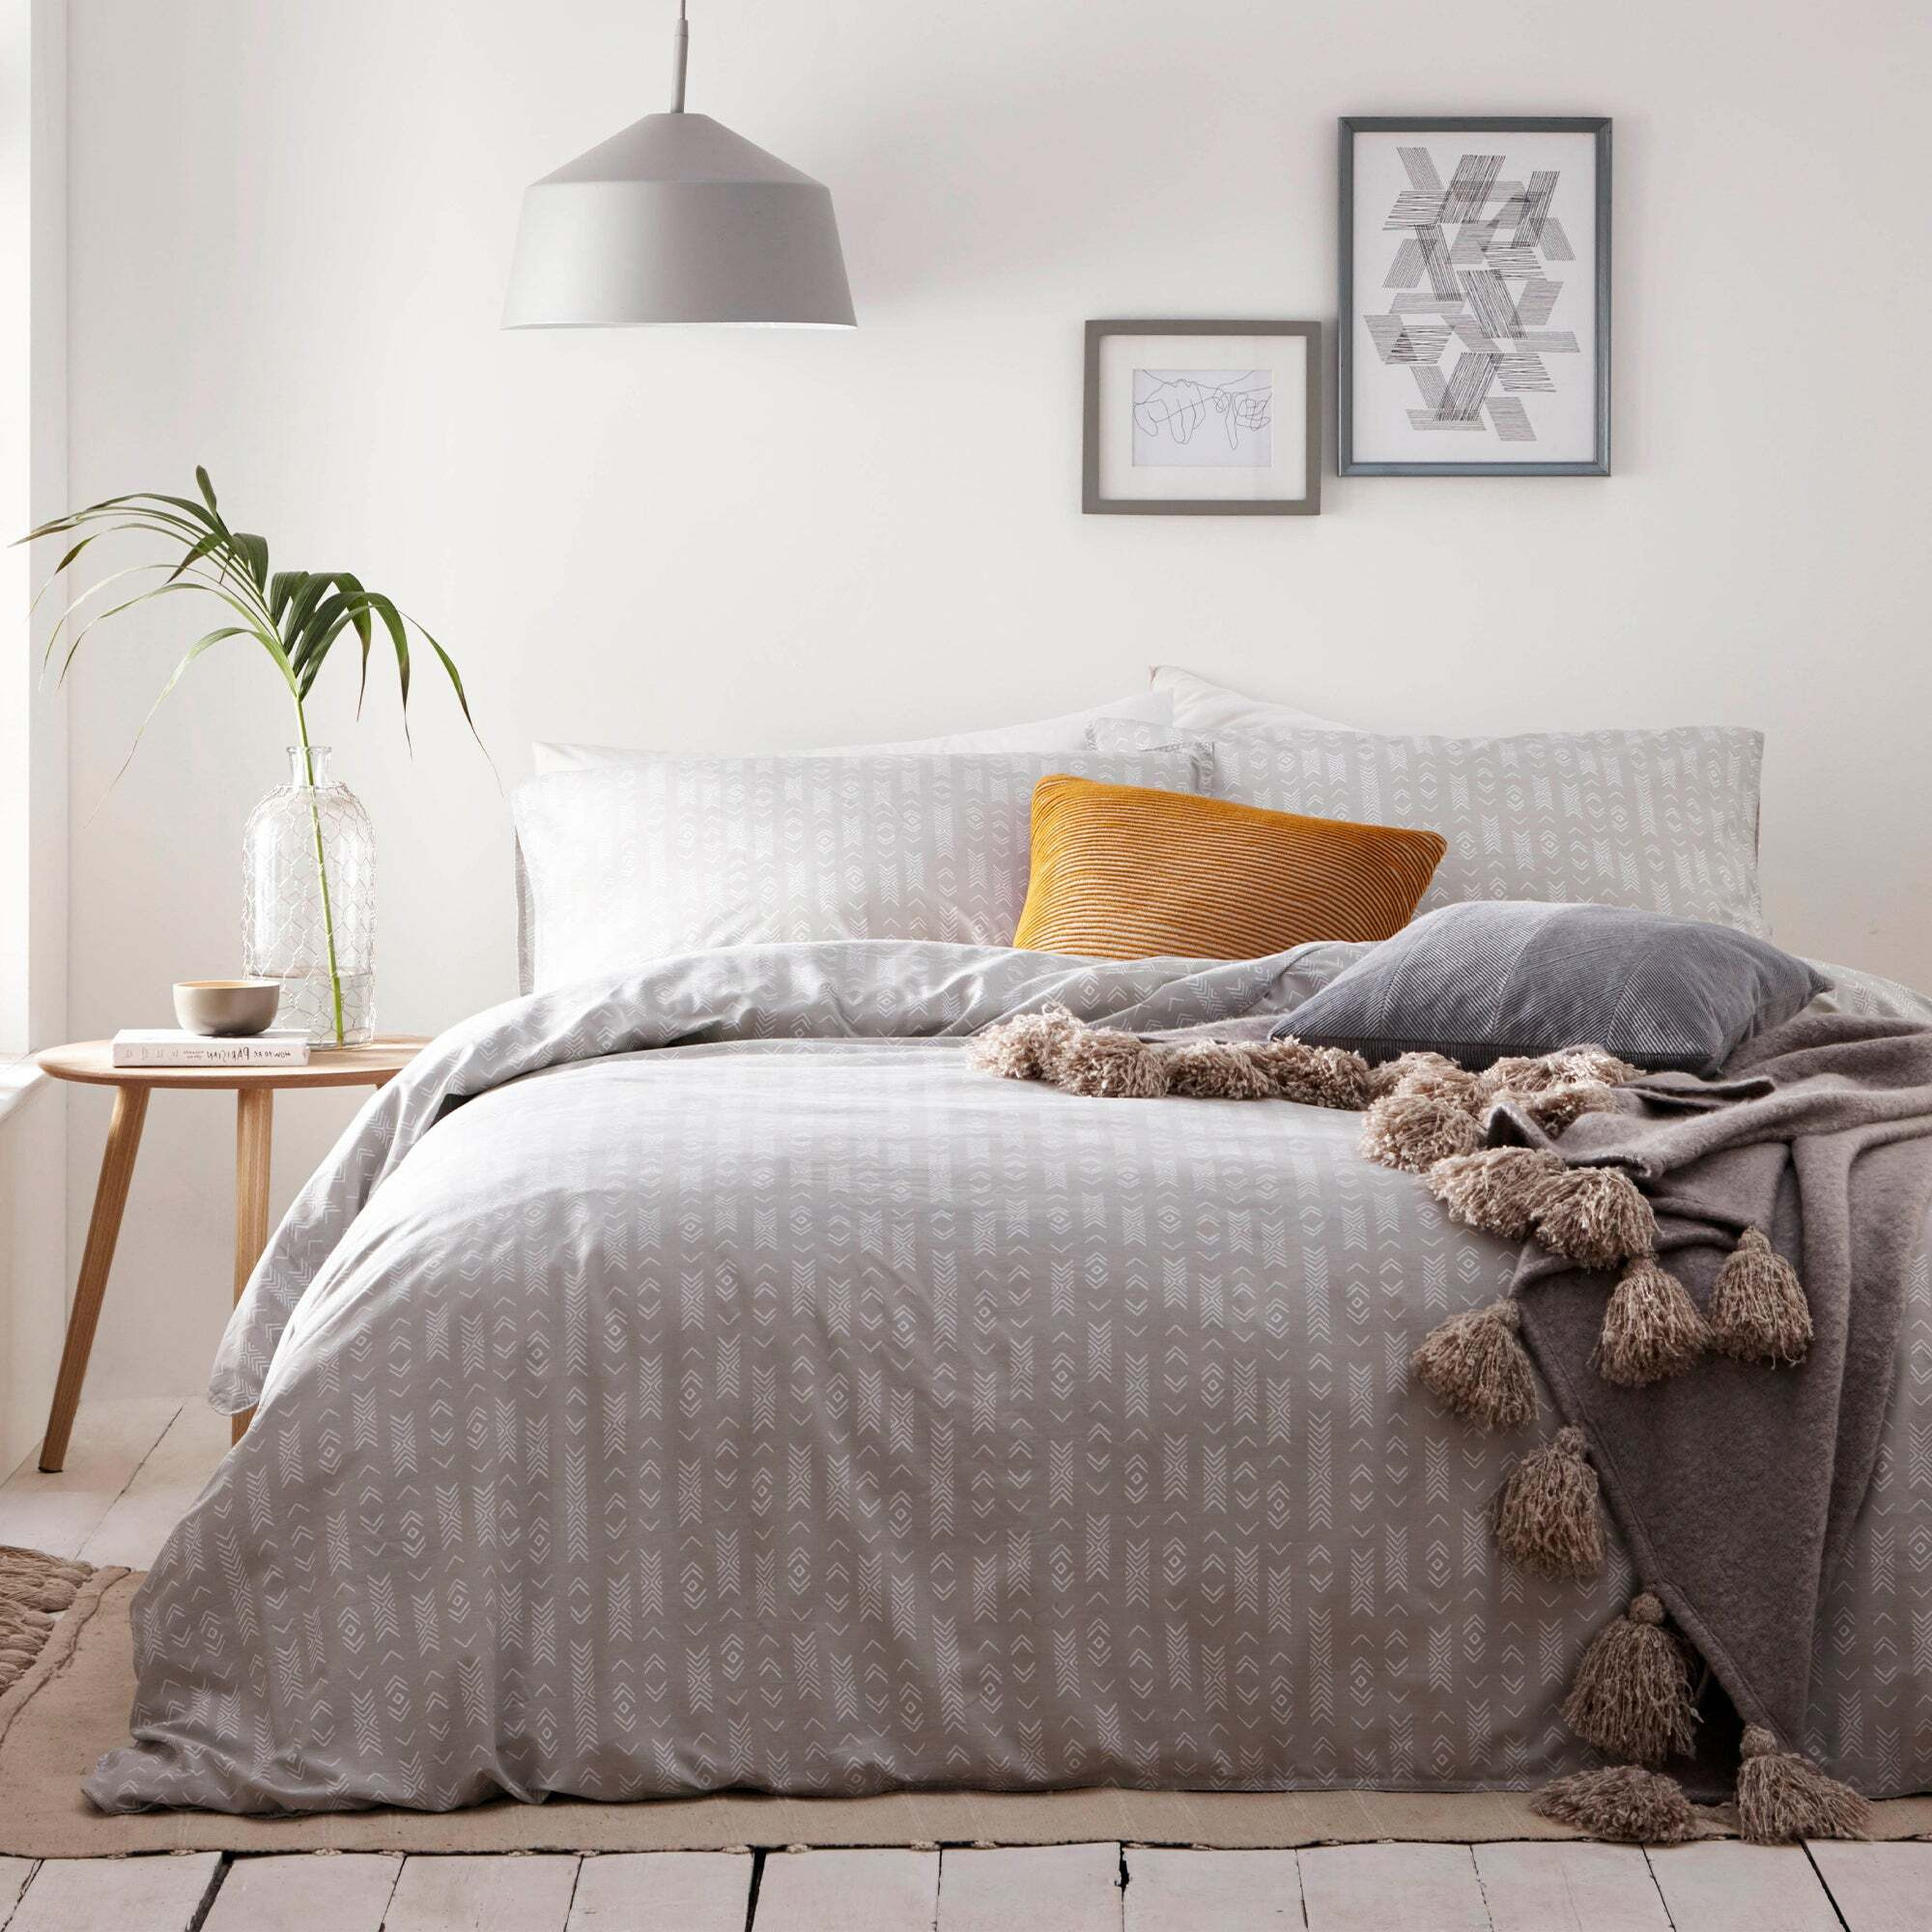 The Linen Yard Greenwich Grey 100% Cotton Duvet Cover and Pillowcase Set Grey and White